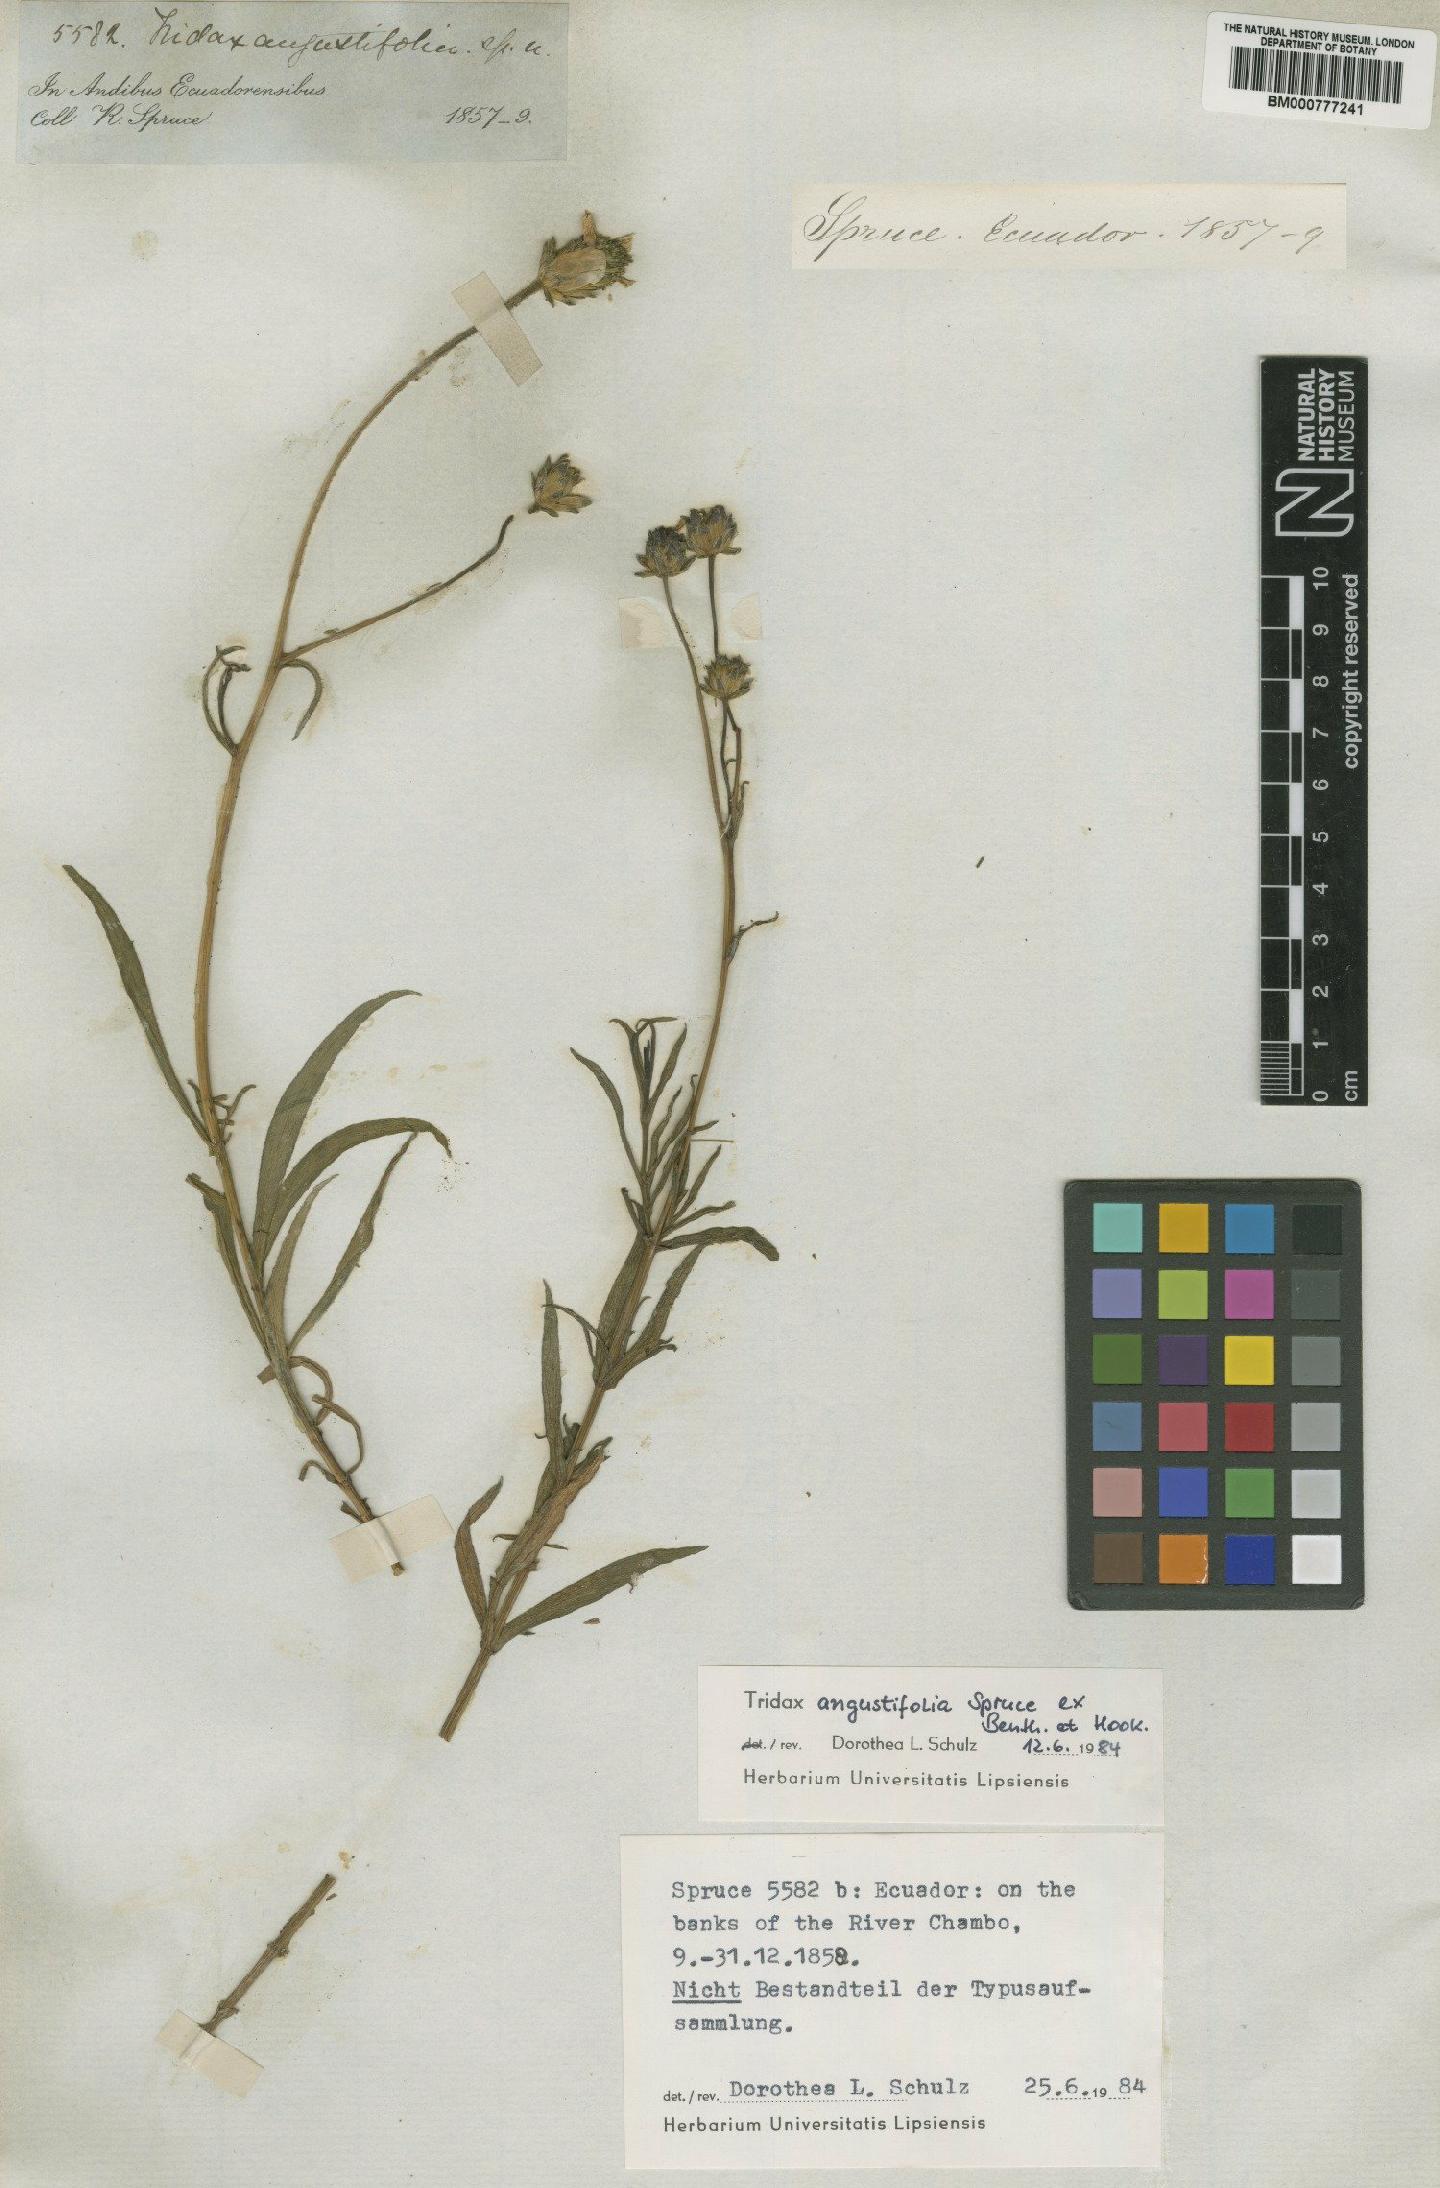 To NHMUK collection (Tridax angustifolia Spruce ex Benth. & Hook.; Type; NHMUK:ecatalogue:4676705)